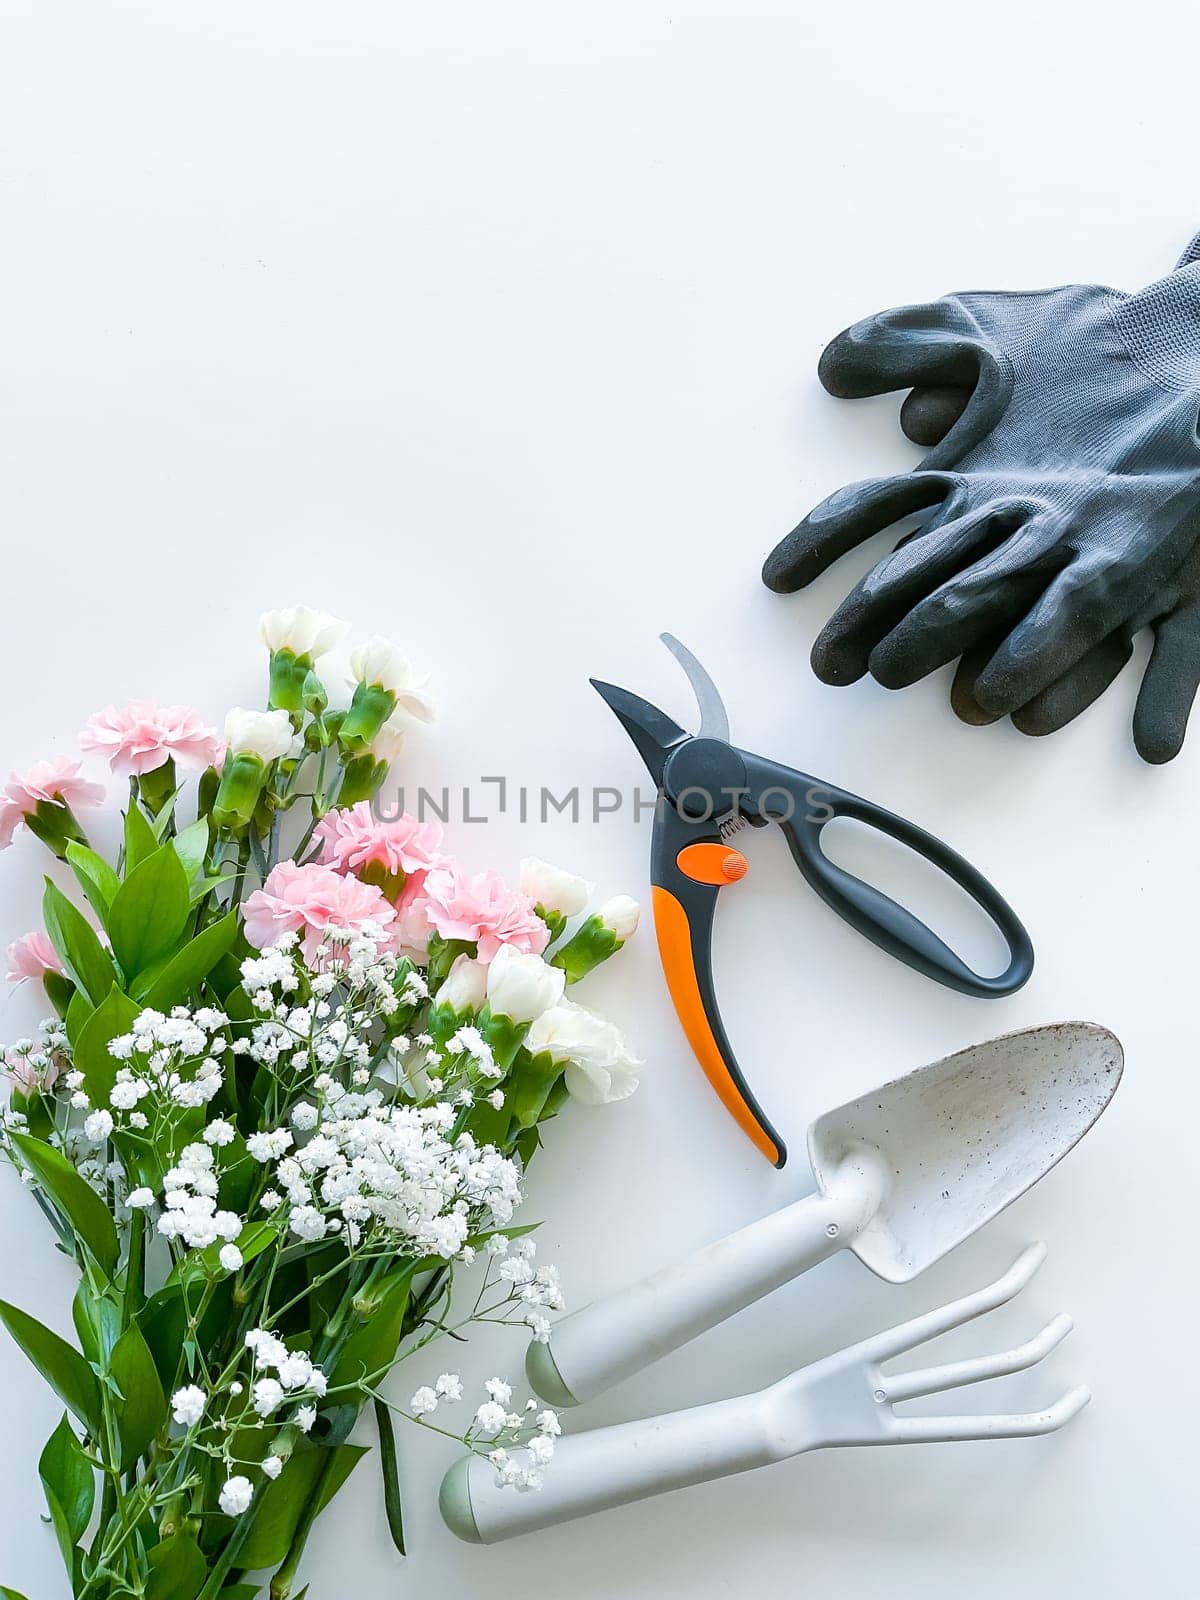 spray pink and white flowers with gardening tools on white background